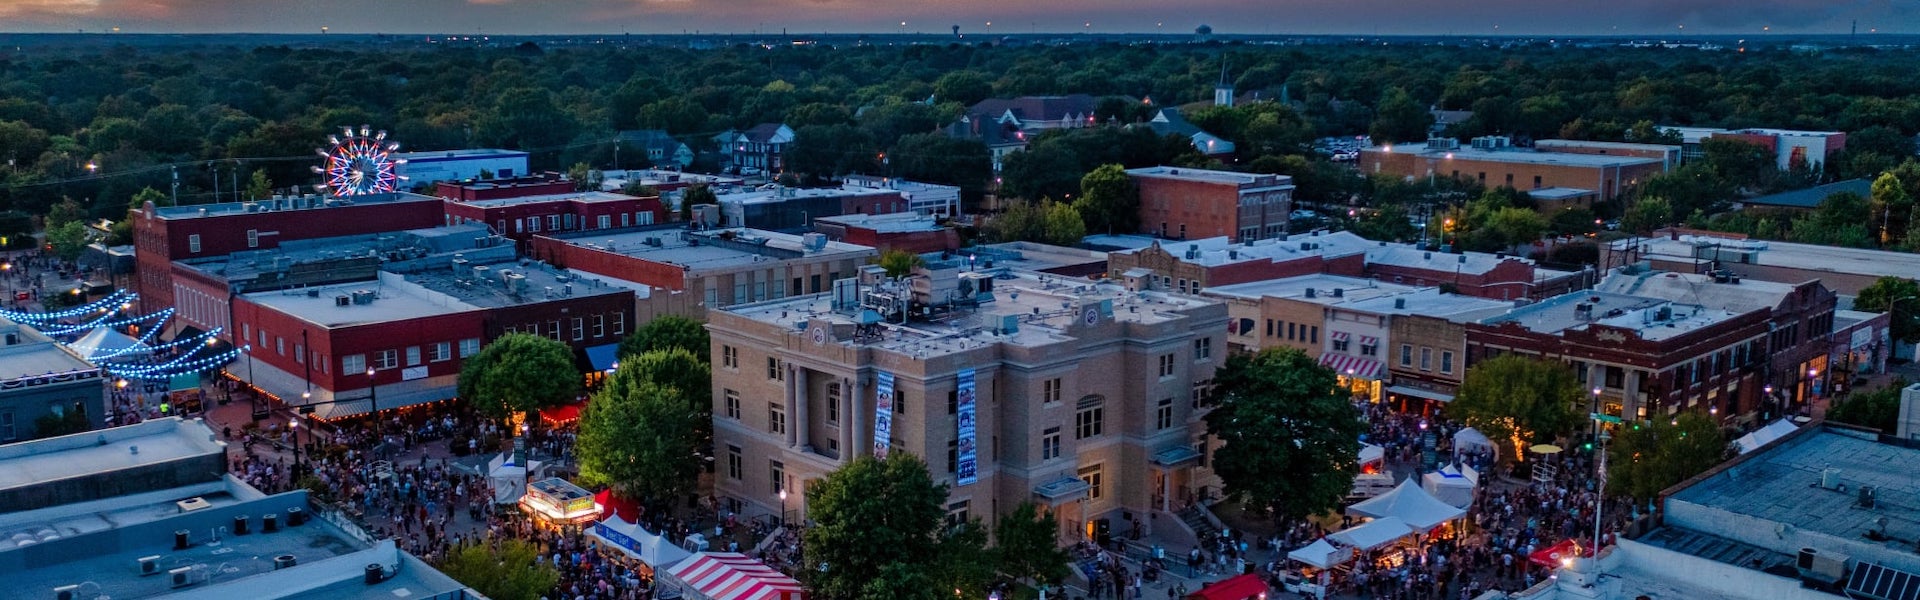 Aerial view of McKinney, TX during a festival